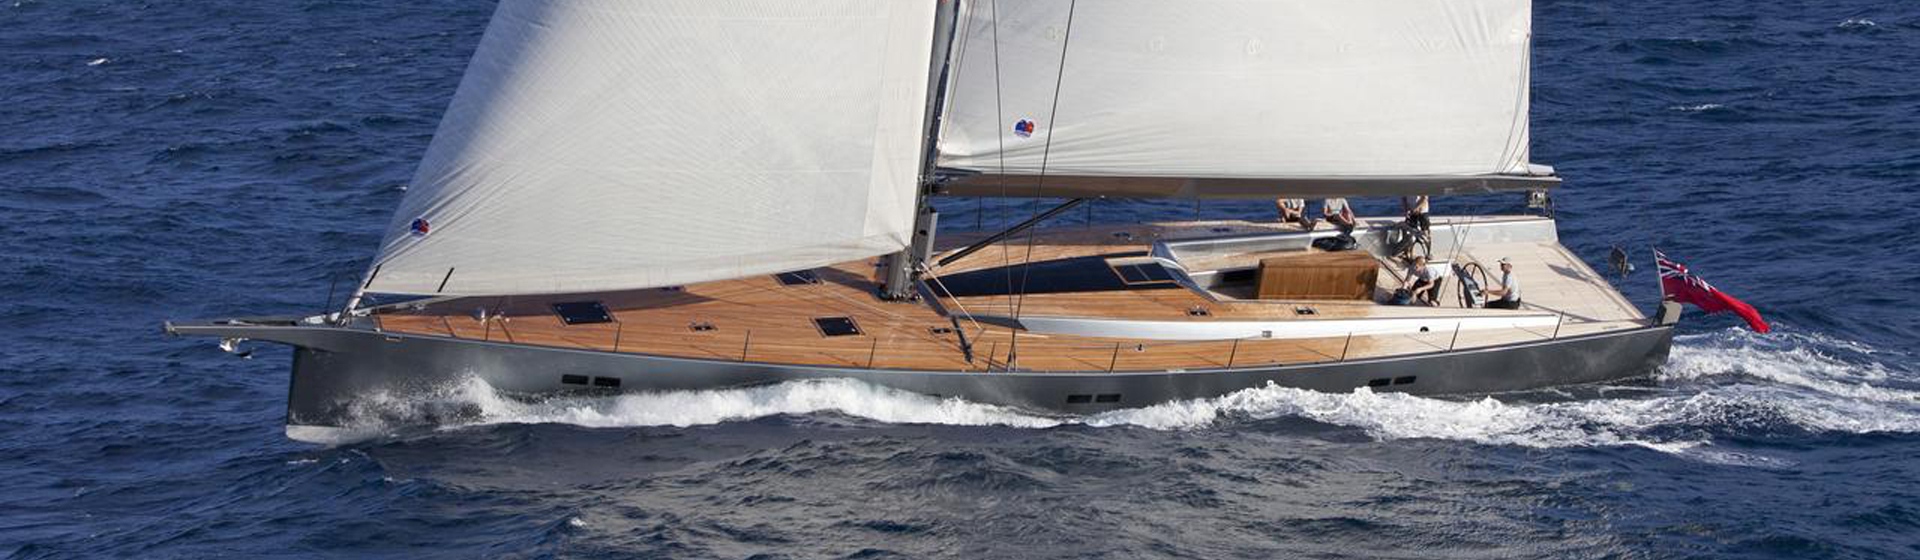 Luxury Sailing Yacht Charter Carbon Yachts